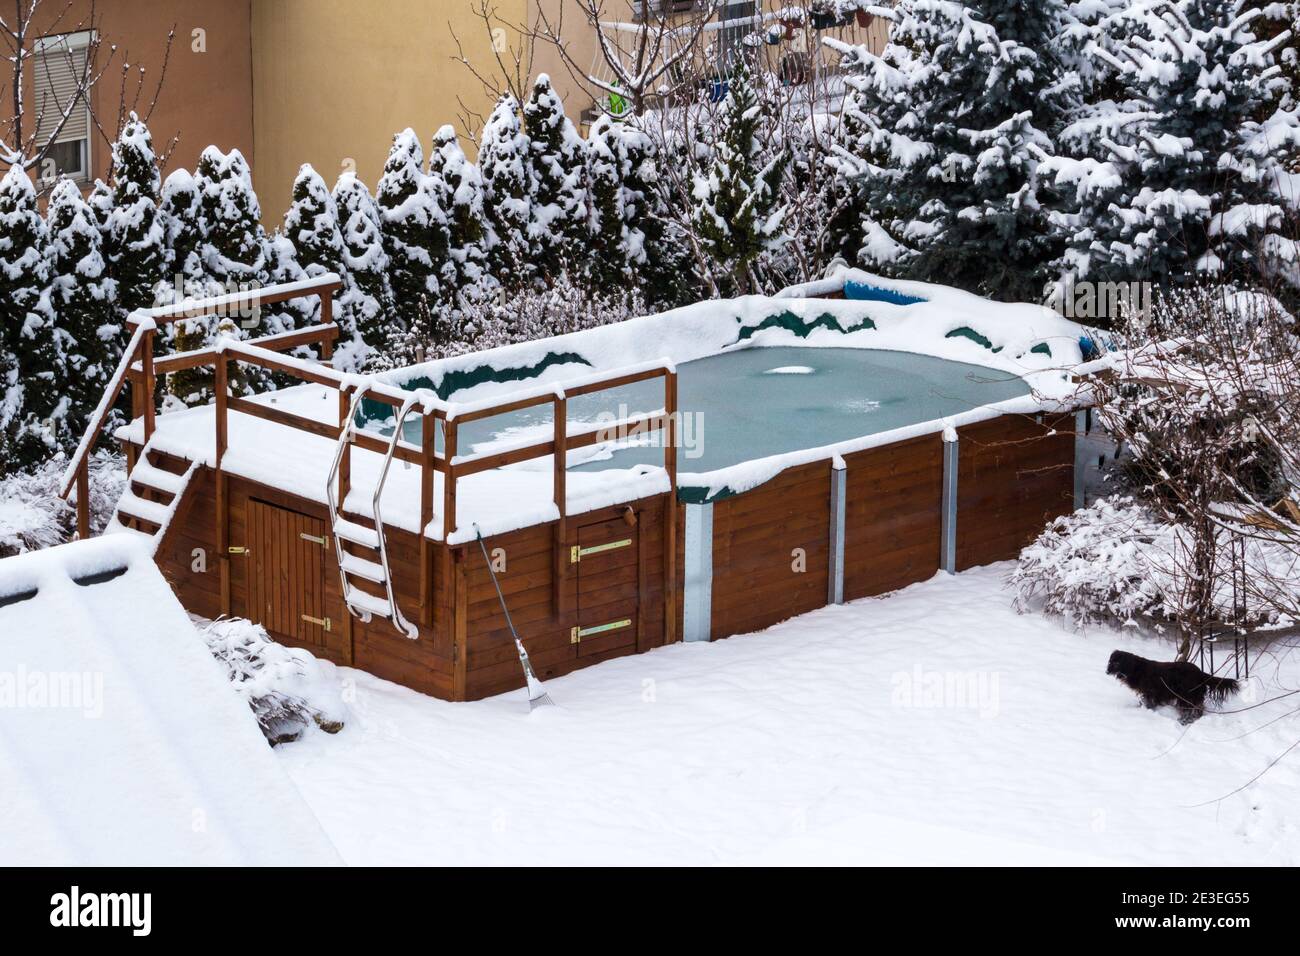 Wooden structure outdoor garden swimming pool covered with snow and ice in winter Stock Photo